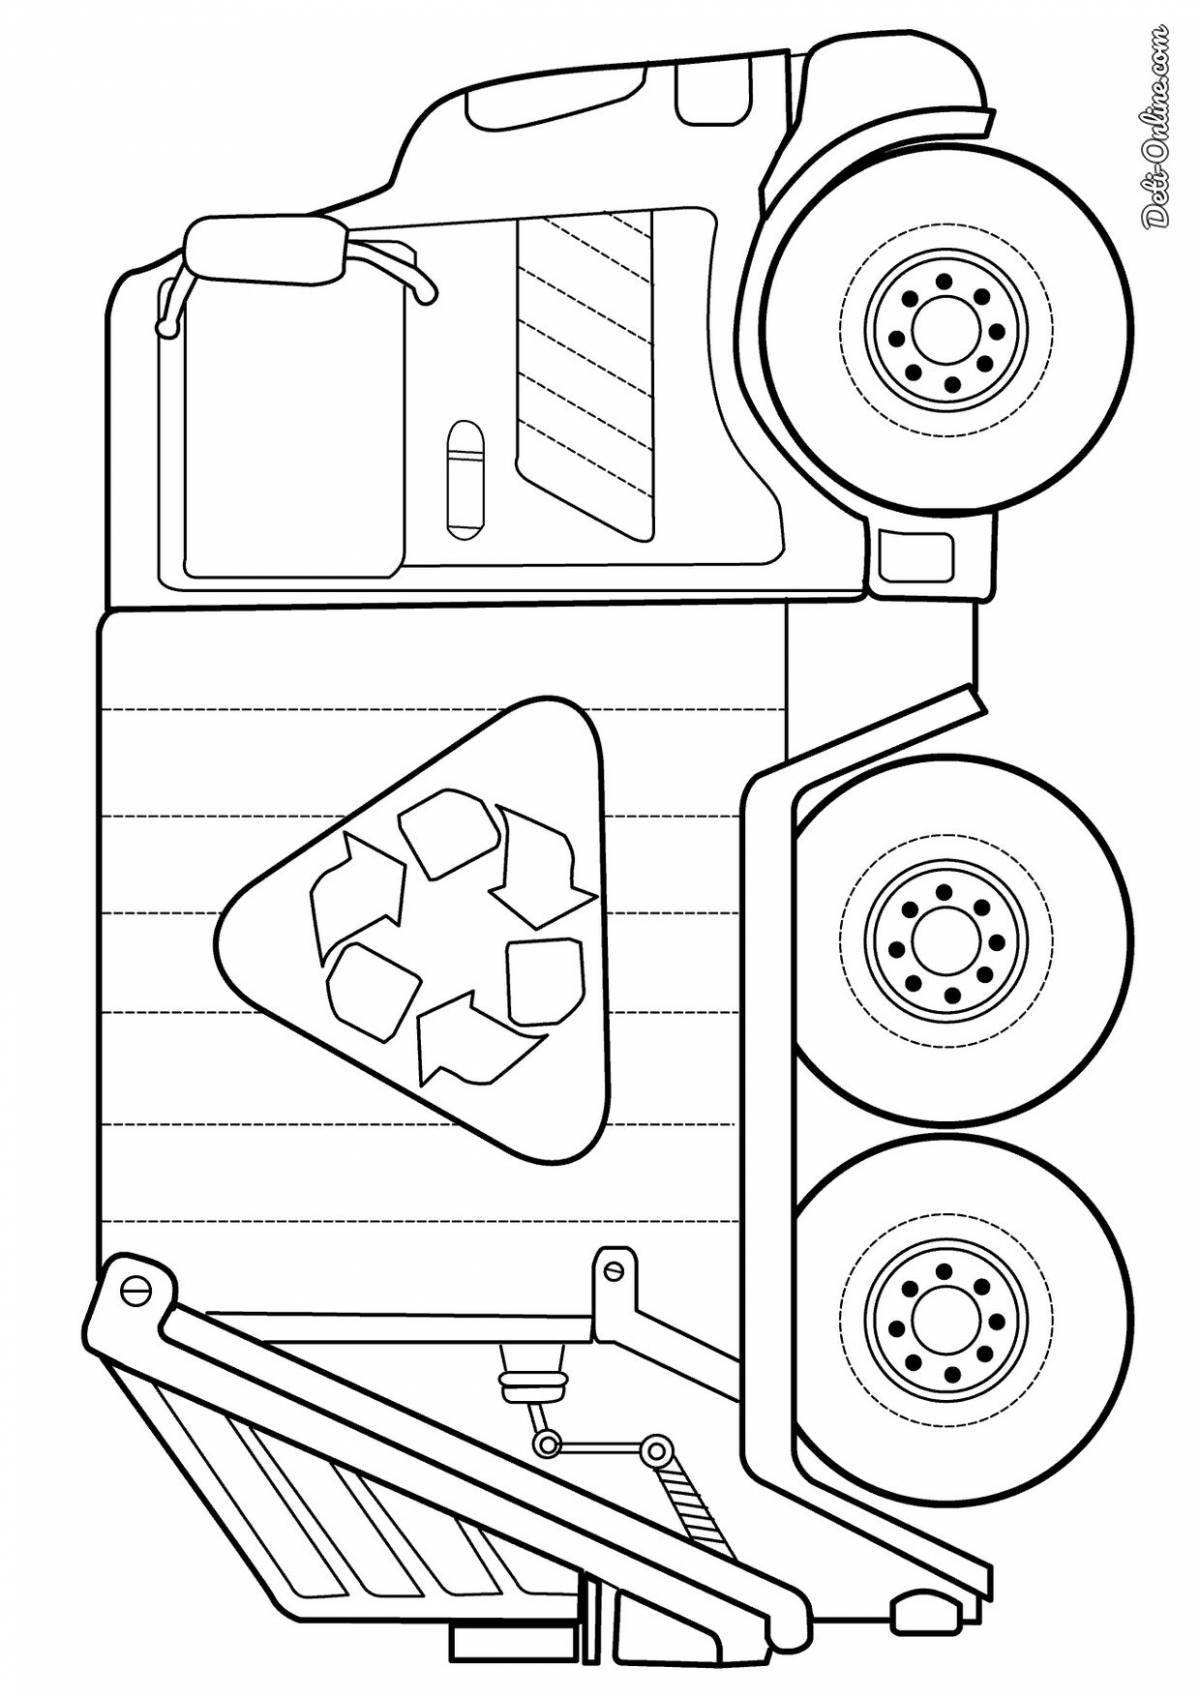 Playful garbage truck coloring page for 3-4 year olds